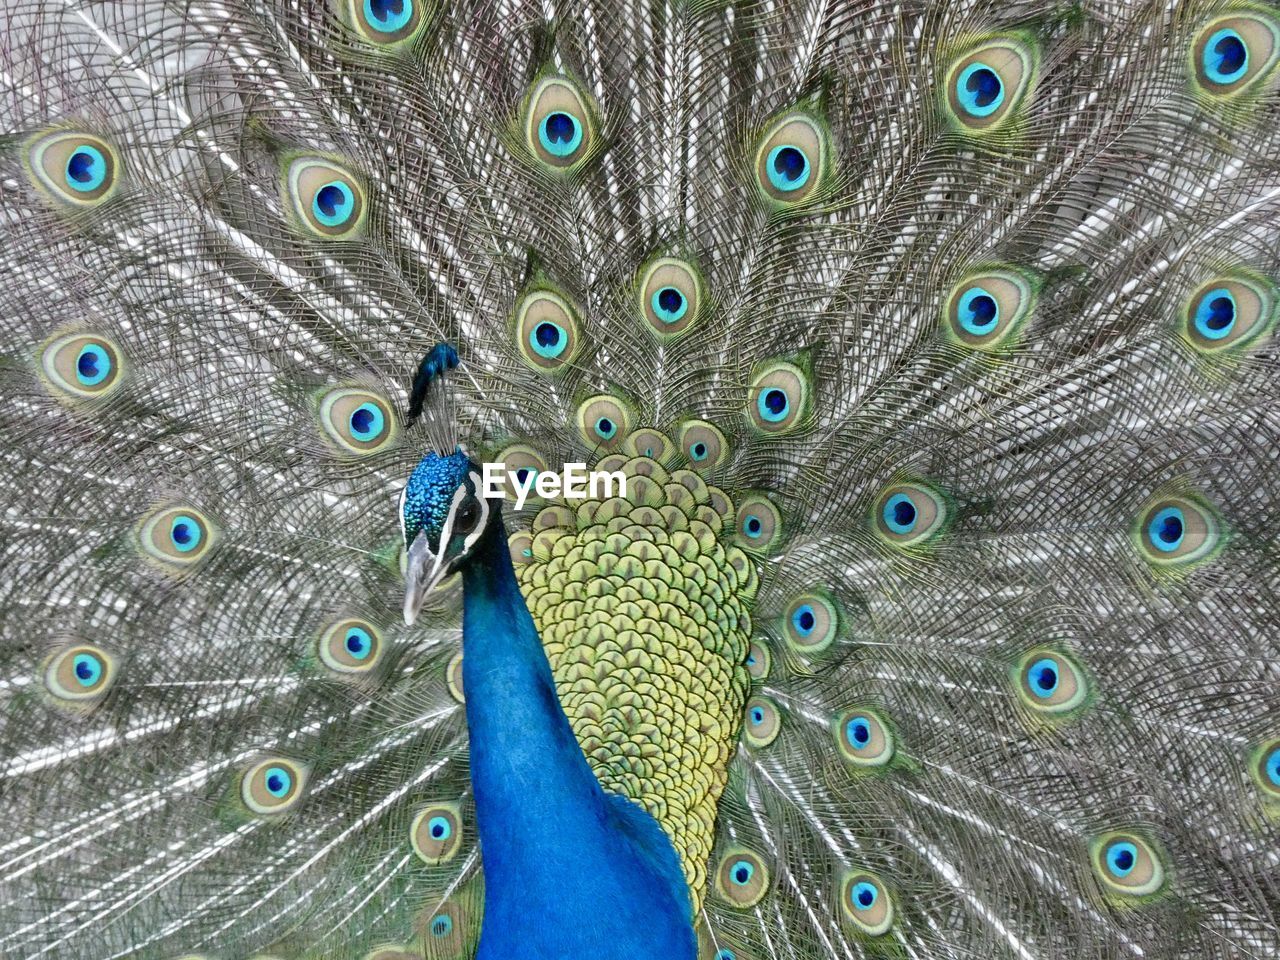 peacock, peacock feather, bird, fanned out, animal themes, animal, animal wildlife, feather, fashion accessory, one animal, showing, showing off, wildlife, beauty in nature, blue, multi colored, dancing, elegance, pride, pattern, close-up, day, nature, full frame, spreading, animal body part, animal behavior, vanity, green, emotion, flying, vibrant color, outdoors, tail, animal's crest, wing, spread wings, beak, animal head, portrait, front view, awe